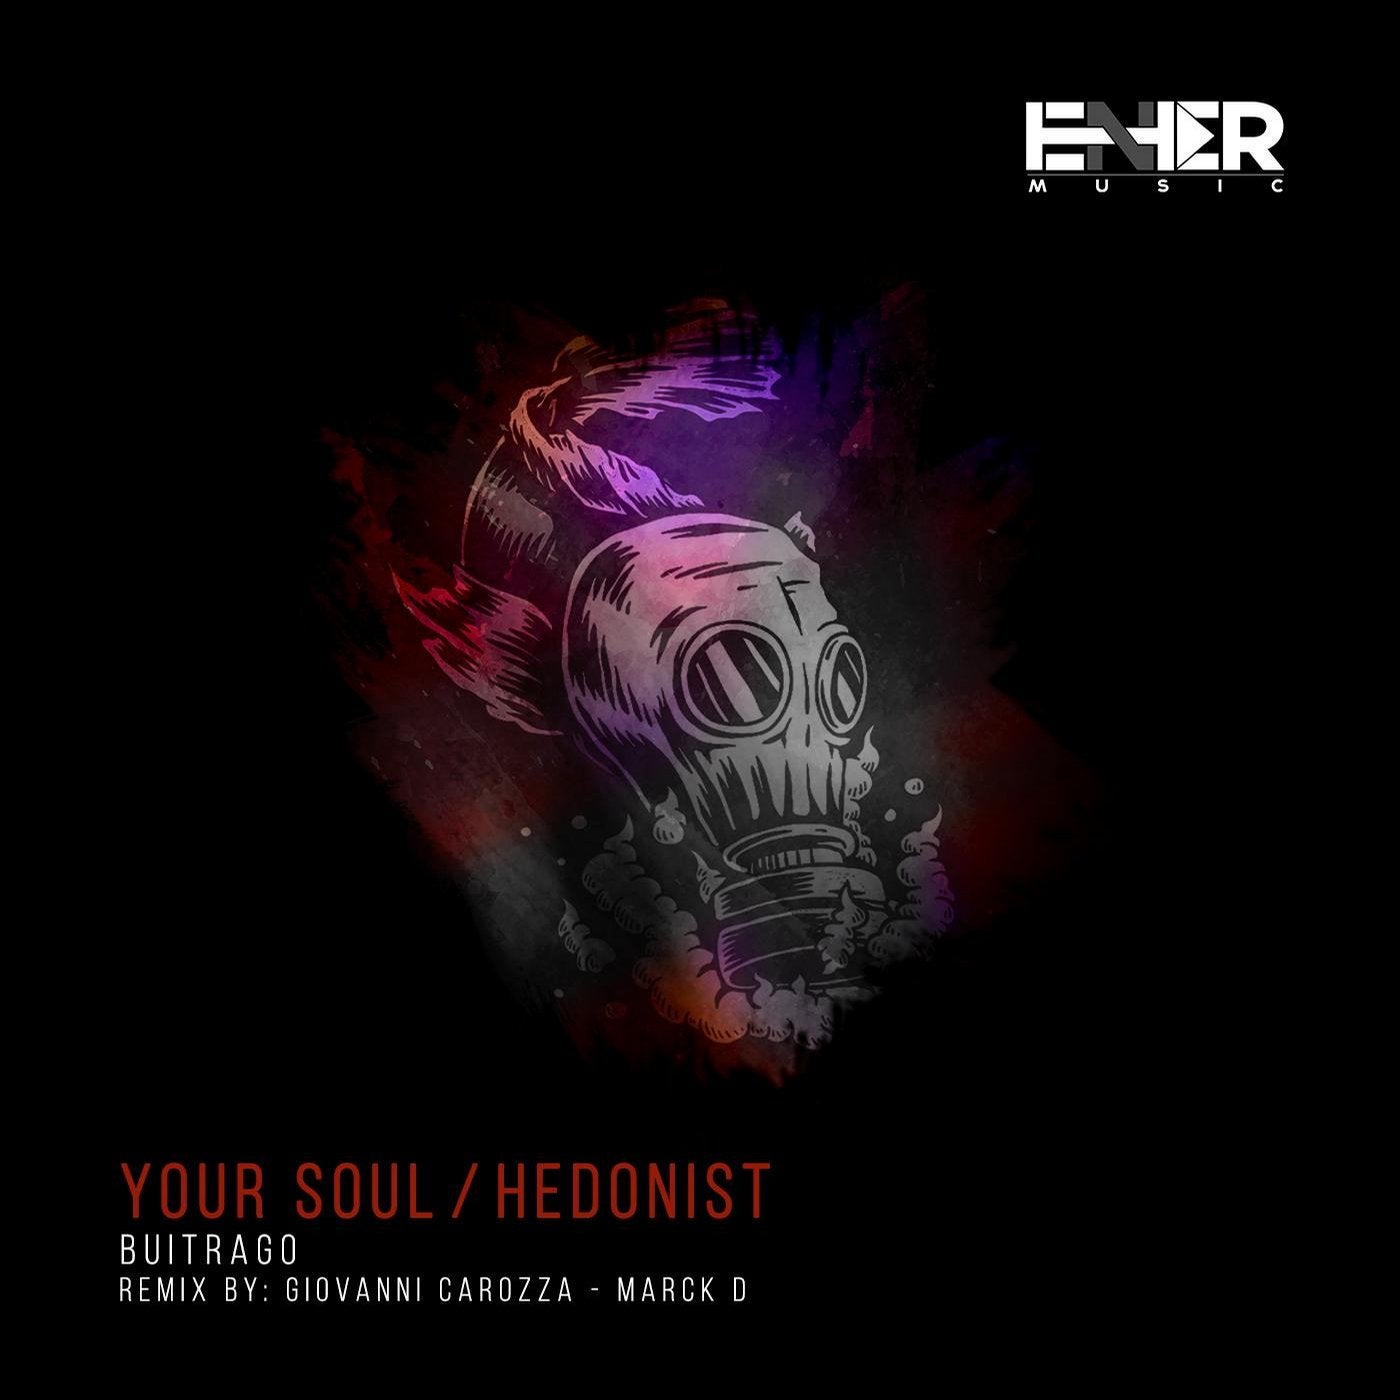 Your Soul / Hedonist